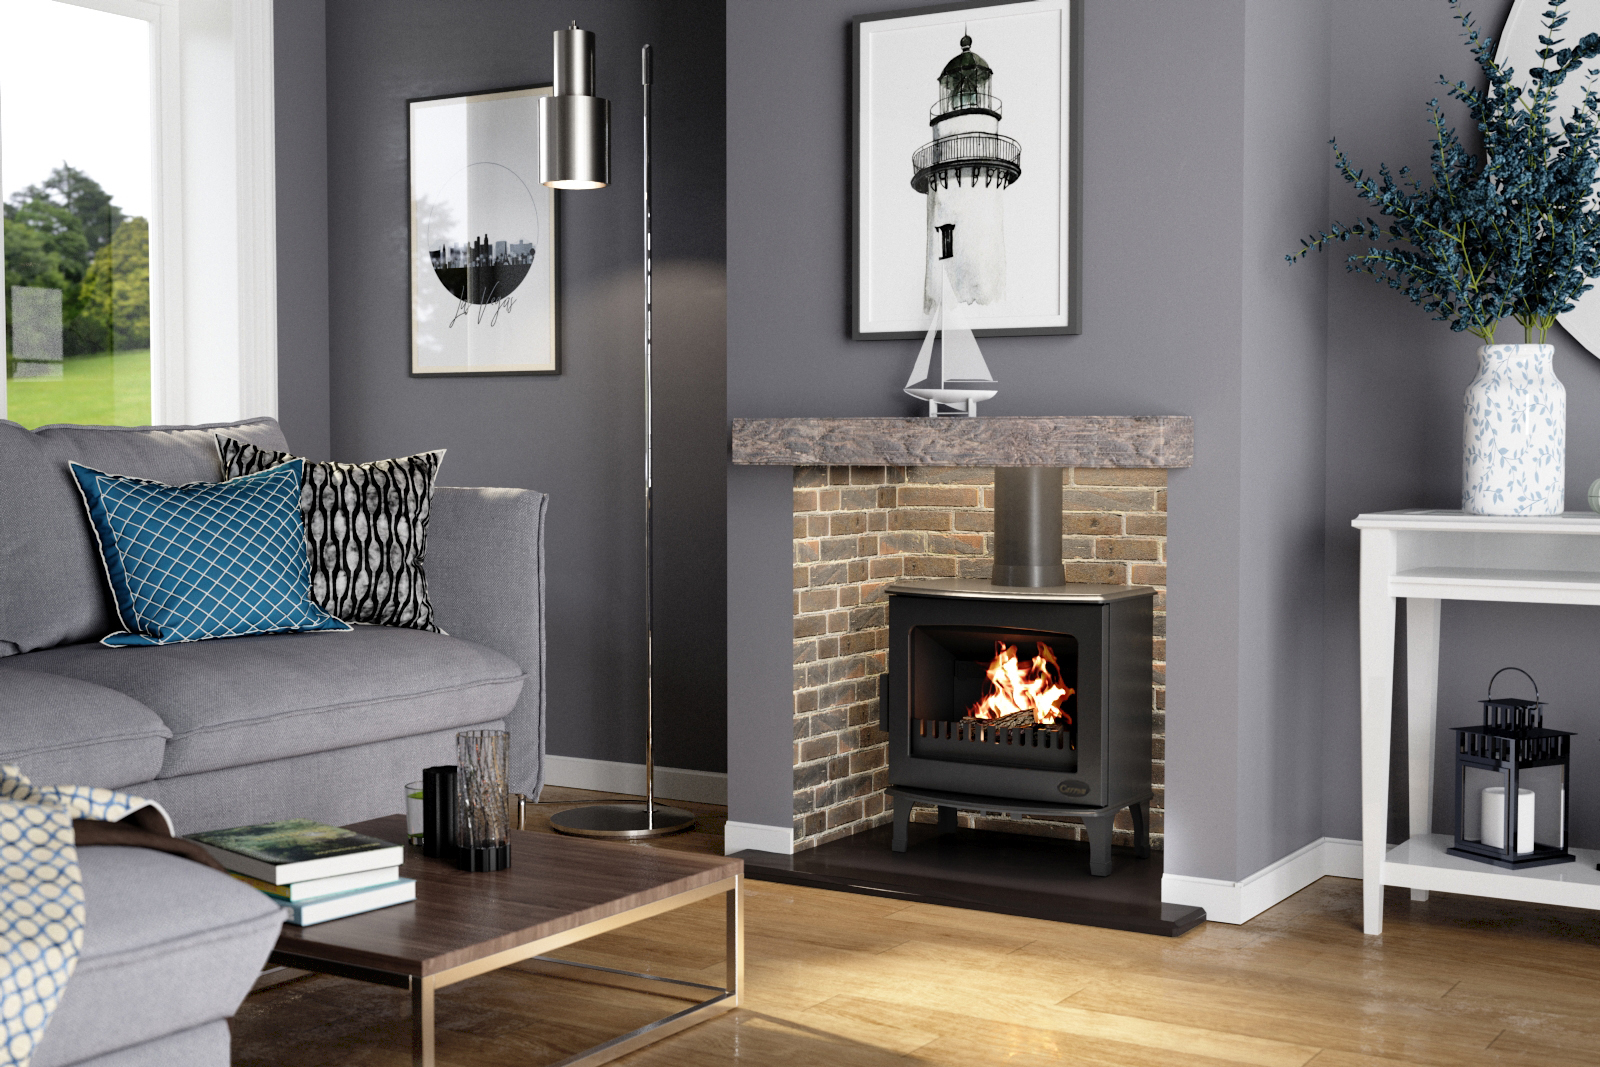 UKAA supply the new ECO Enamel log burning stove by Carron. This stove is ECO design 2022 complieant and comes with a 5 year guarantee